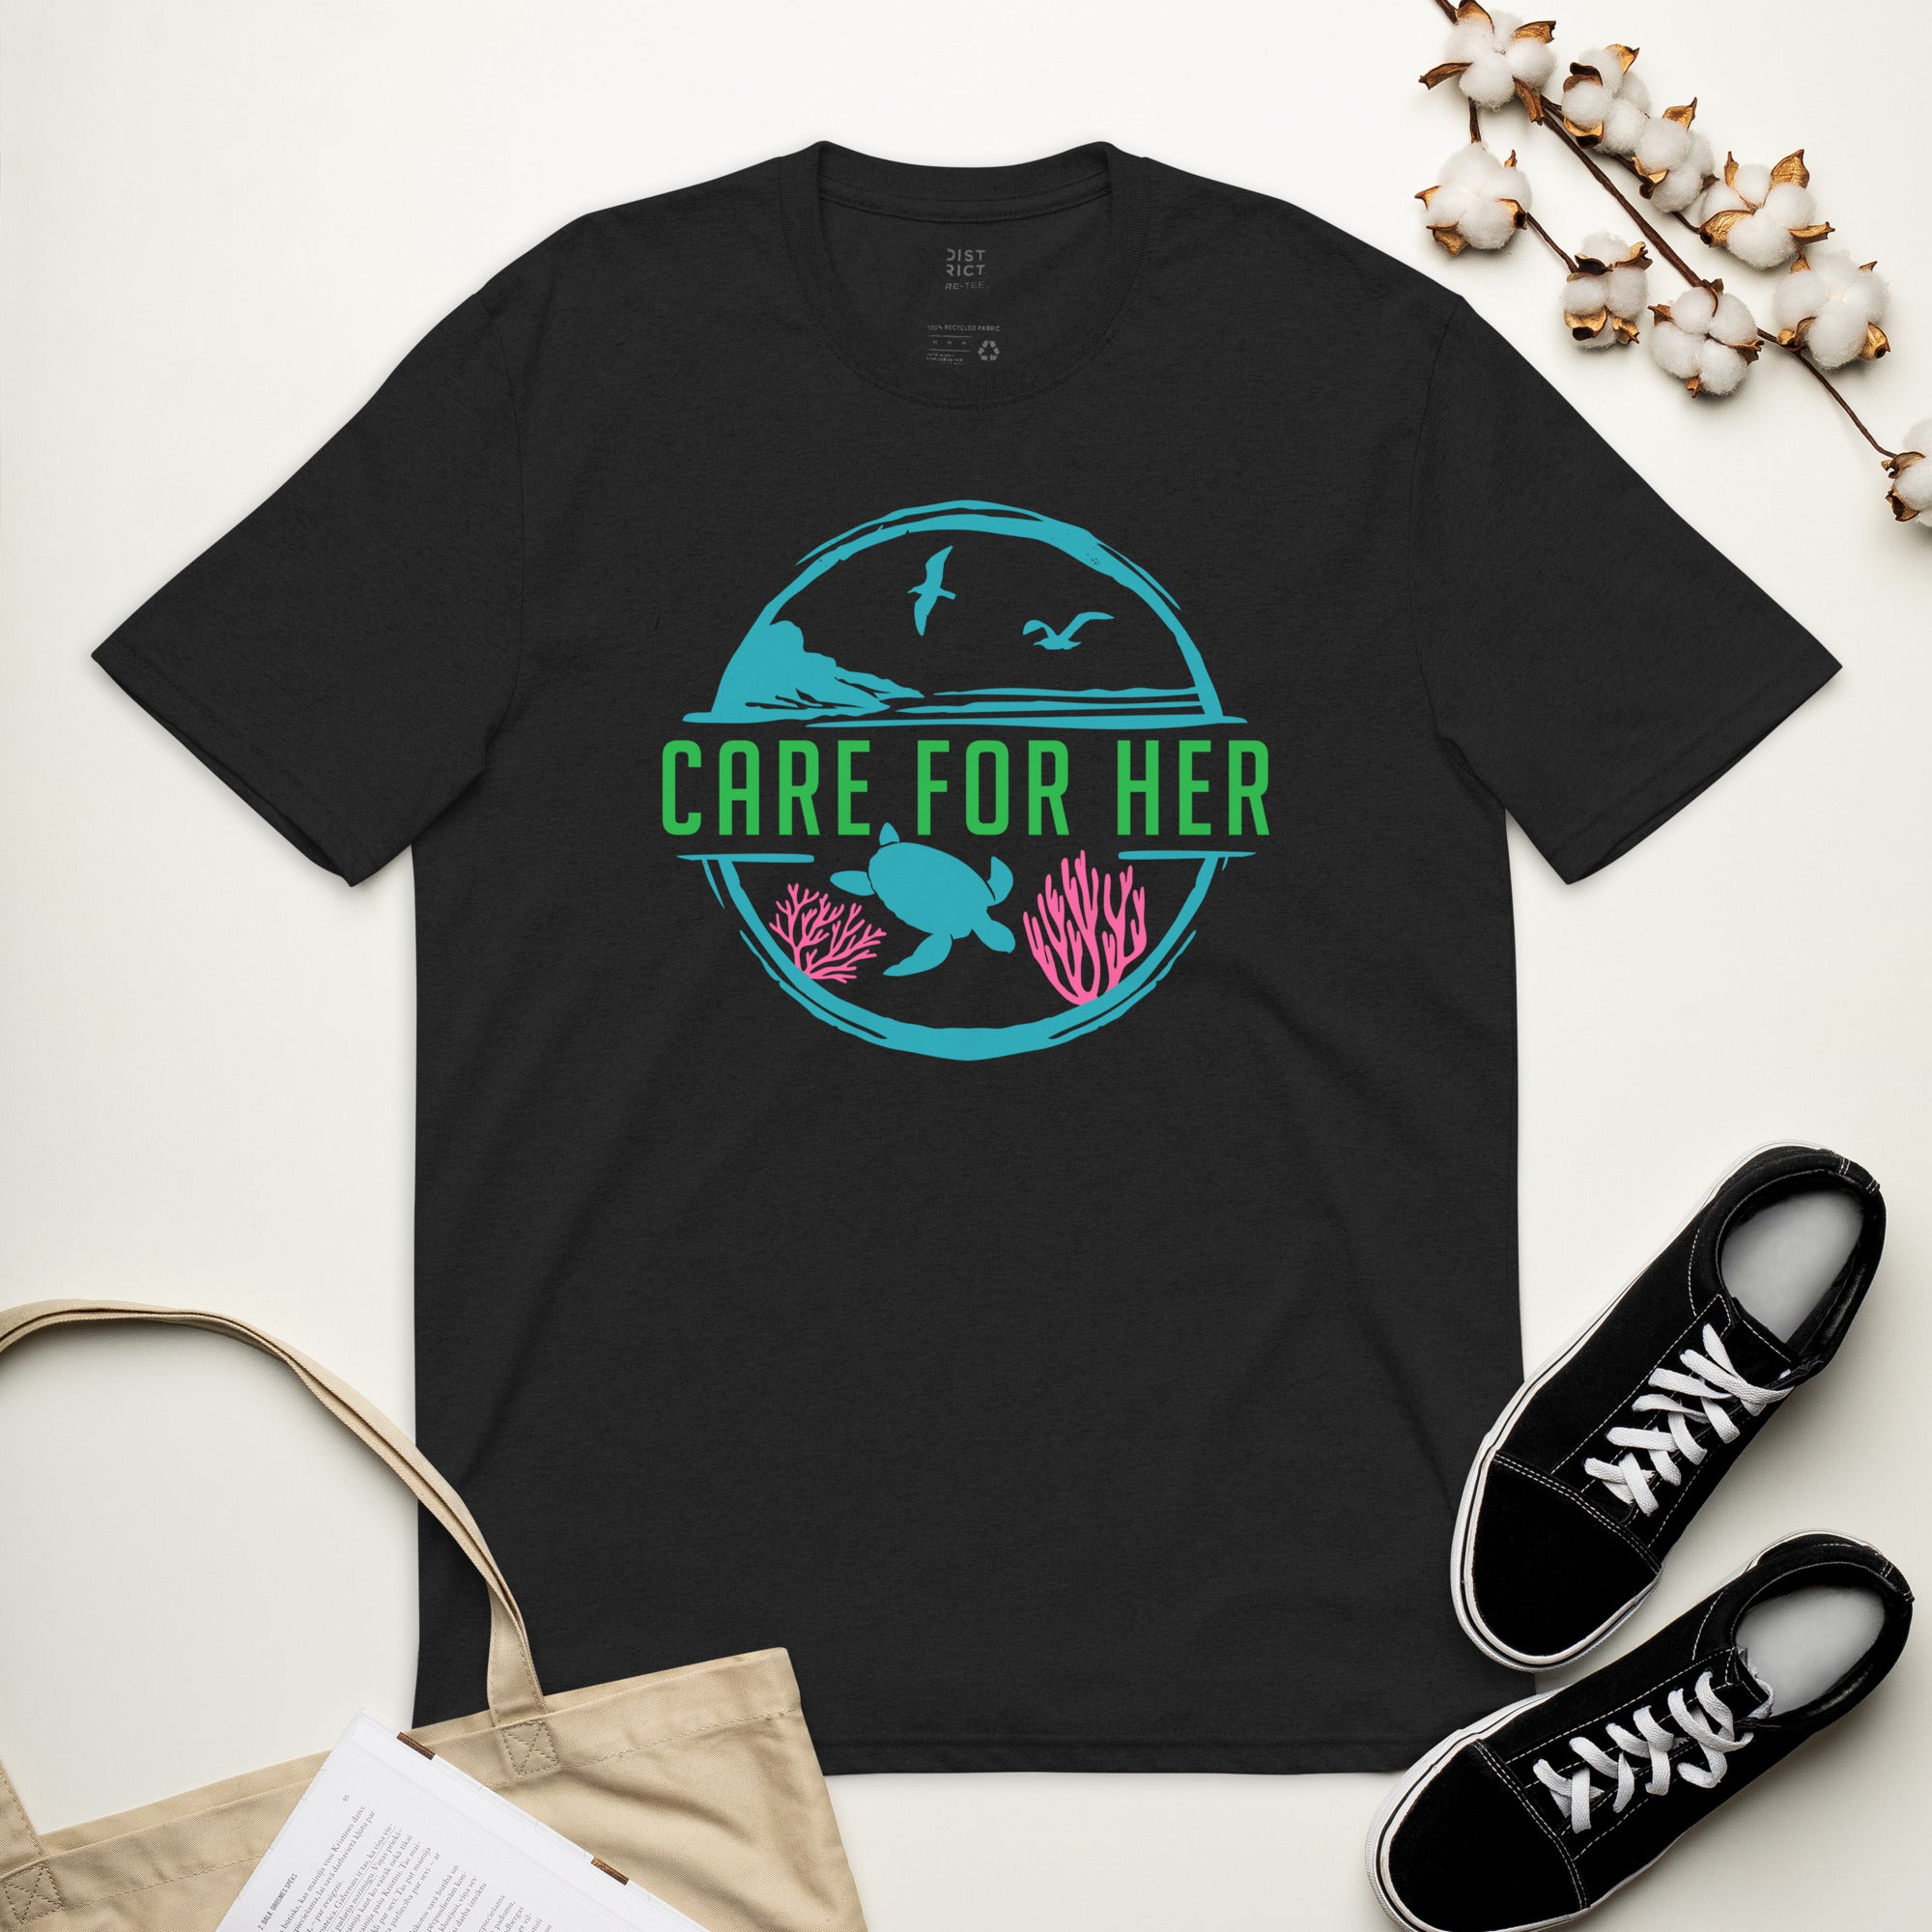 Care for Planet Earth Against Climate Change Unisex Recycled Sustainable T Shirt